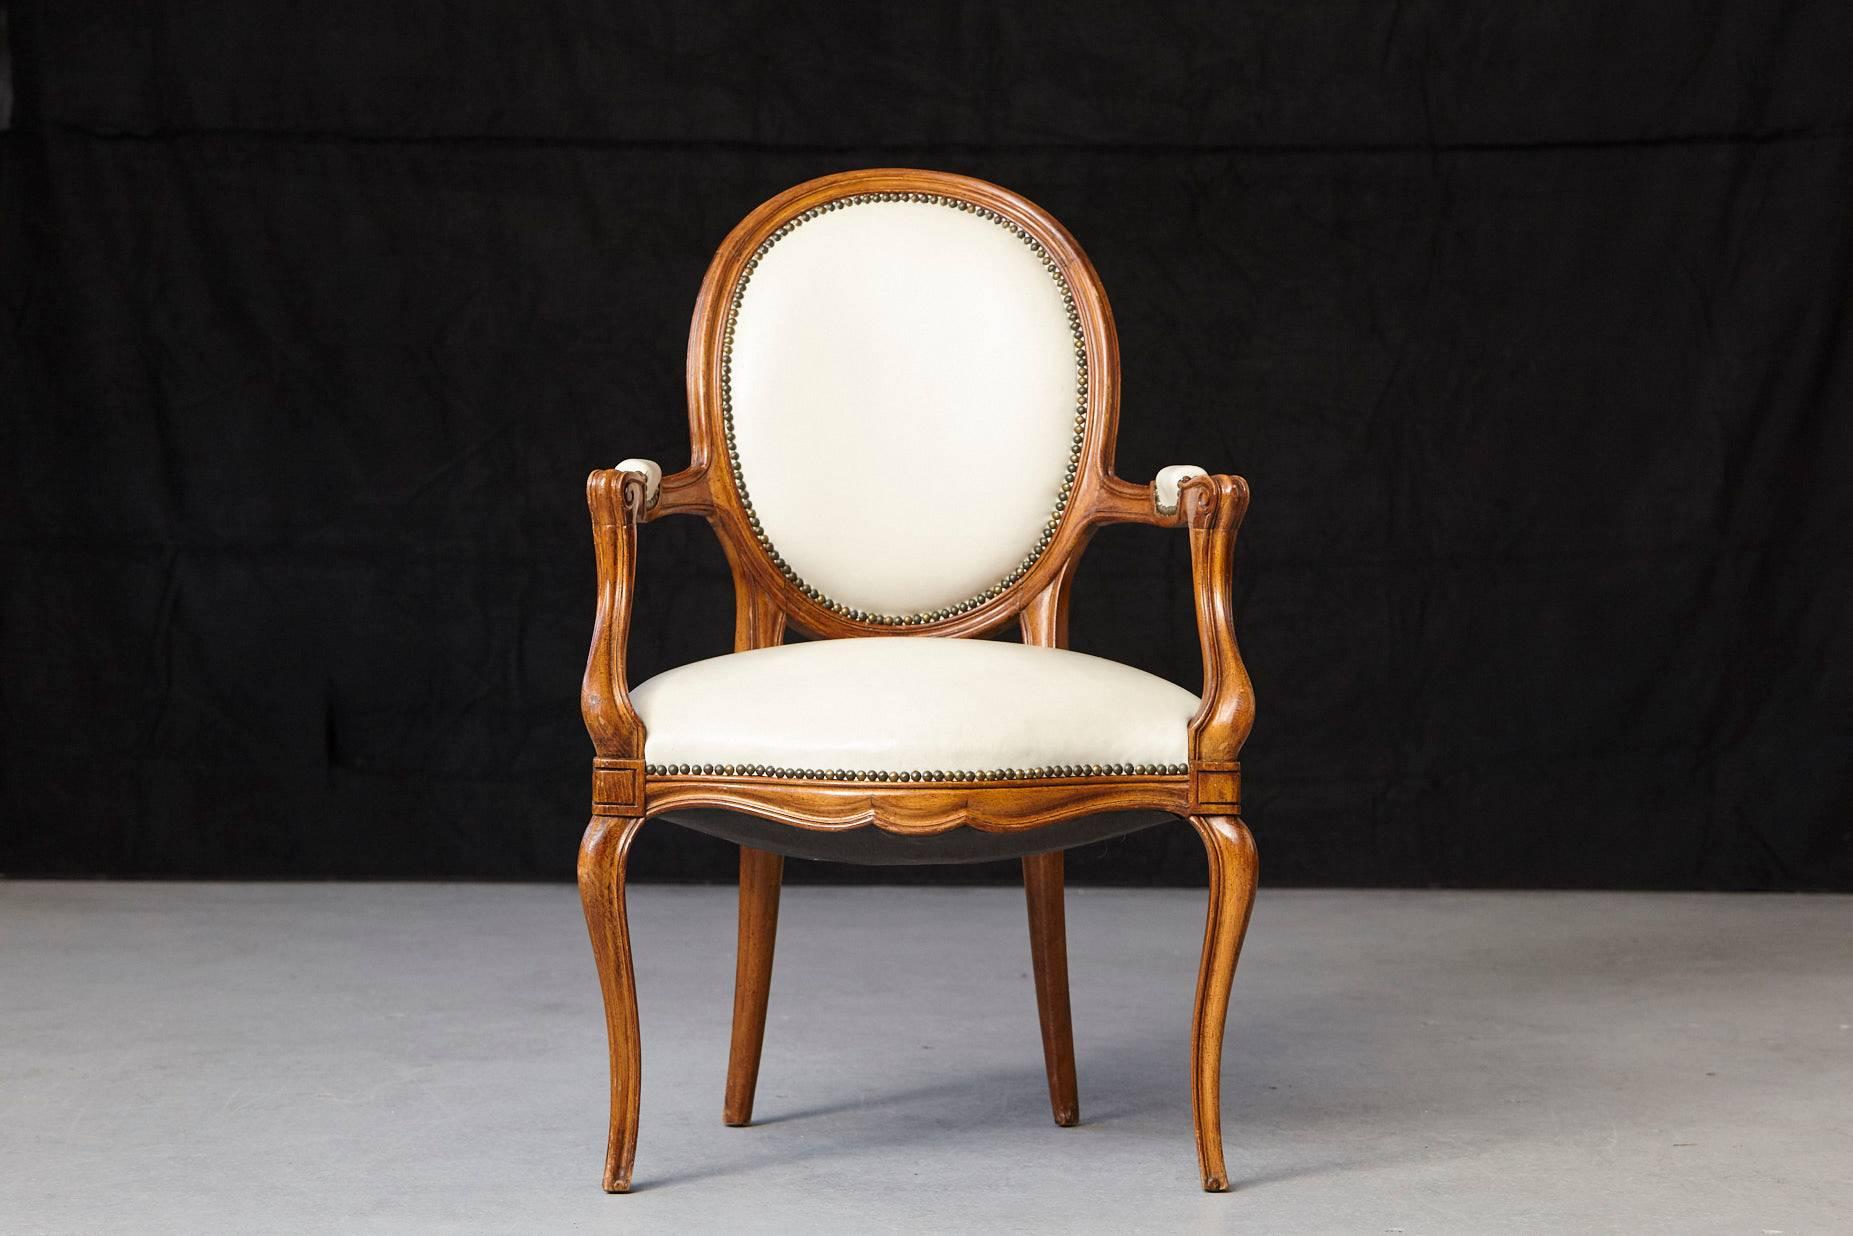 Gorgeous Louis XV style fauteuil with a molded walnut frame, having an oval back and shaped seat covered in nail trimmed creme leather and with conforming elbows rests on the shaped arms. The arms with voluted supports, shaped apron, the whole